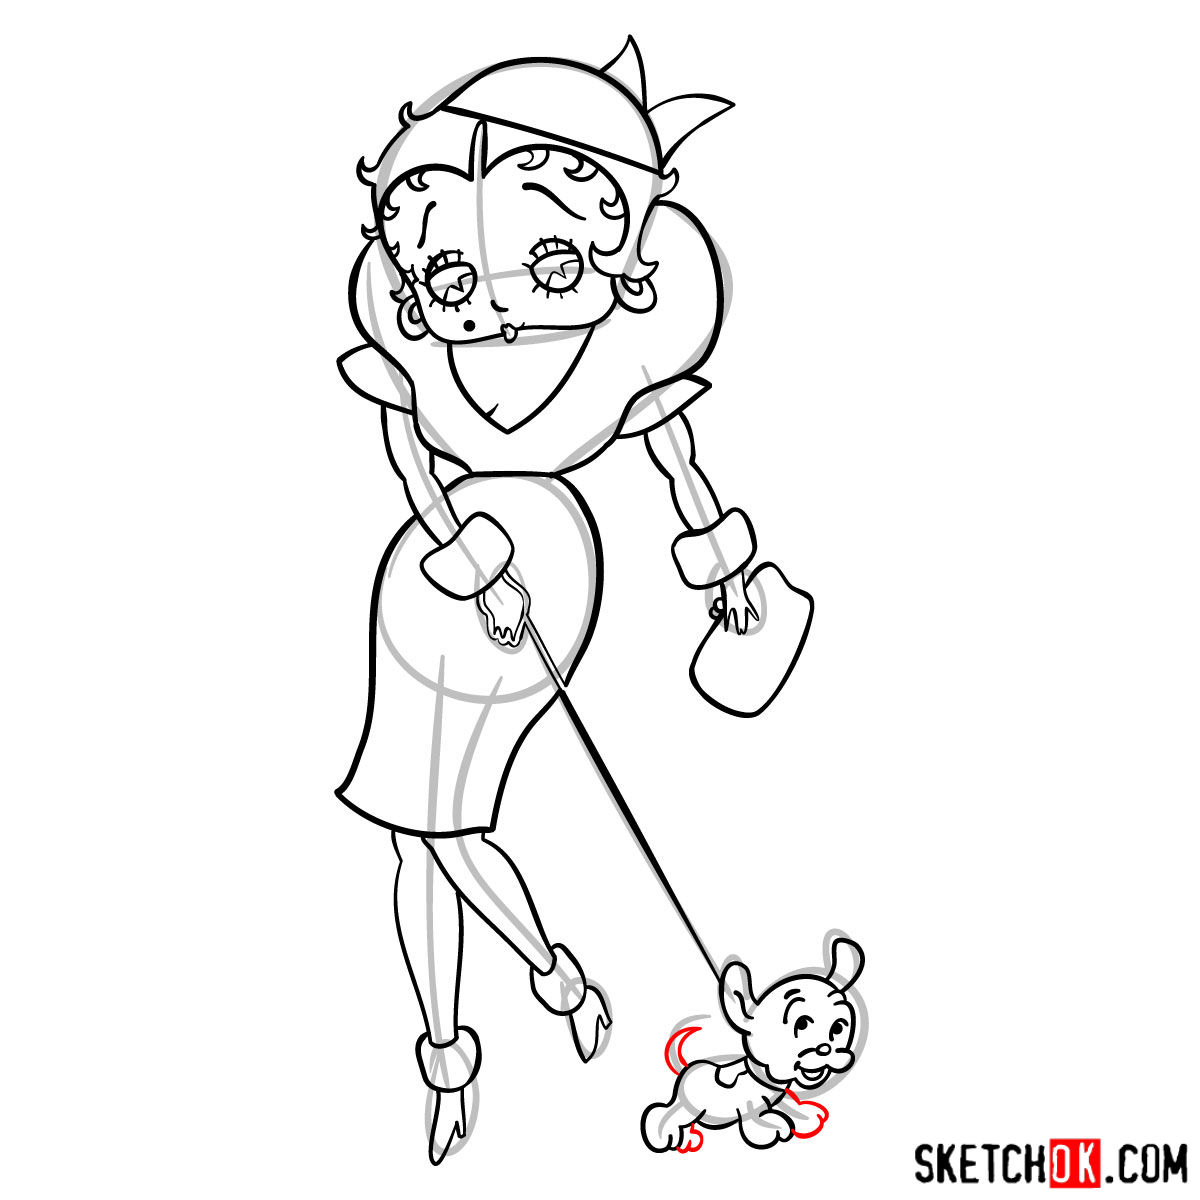 How to draw Betty Boop with her dog - step 16